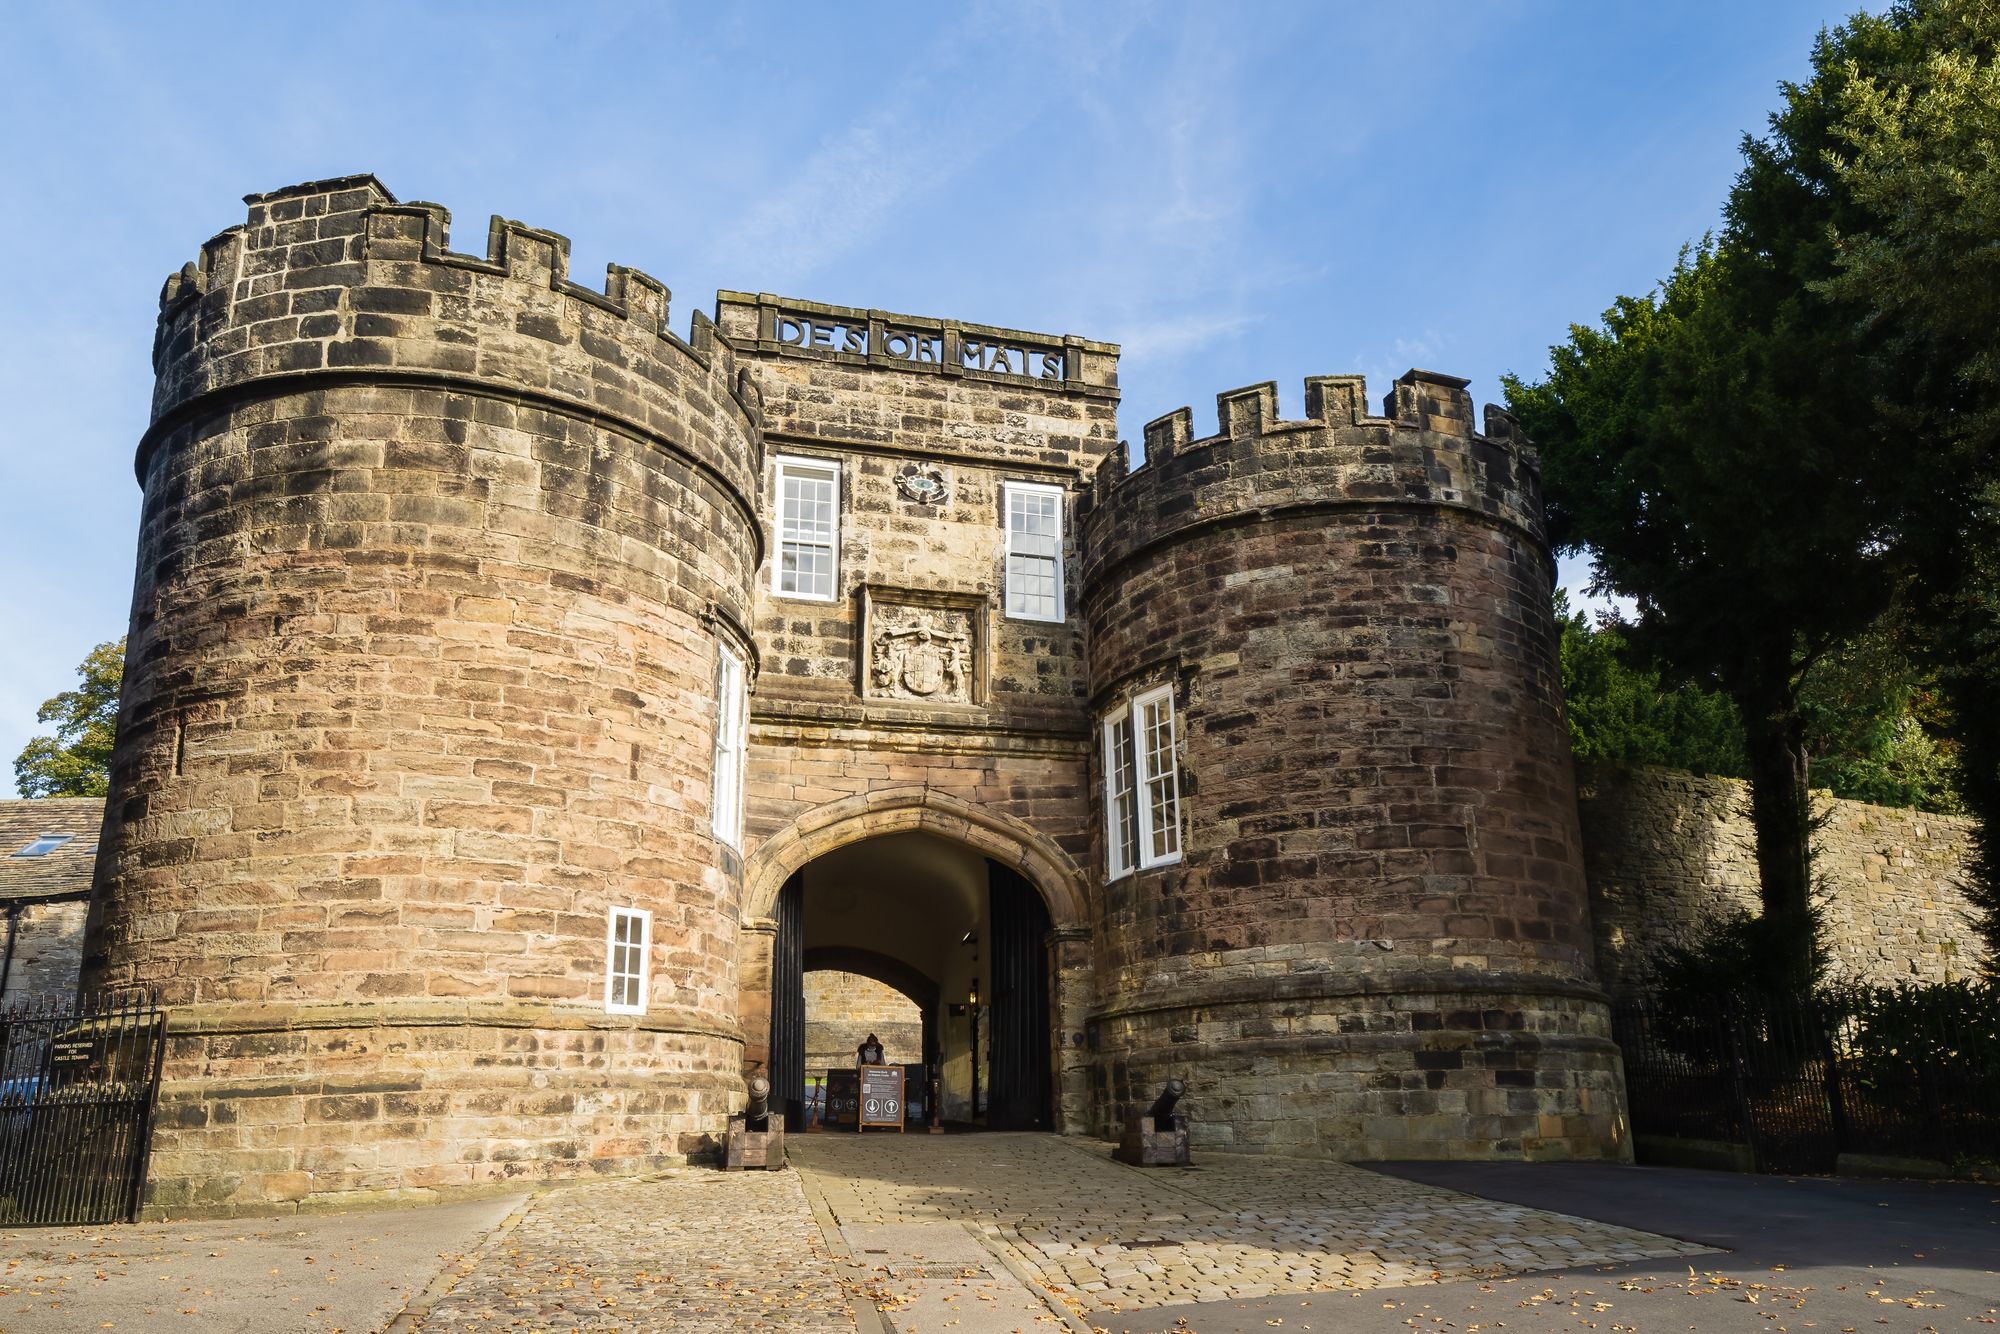 The front entrance of Skipton Castle